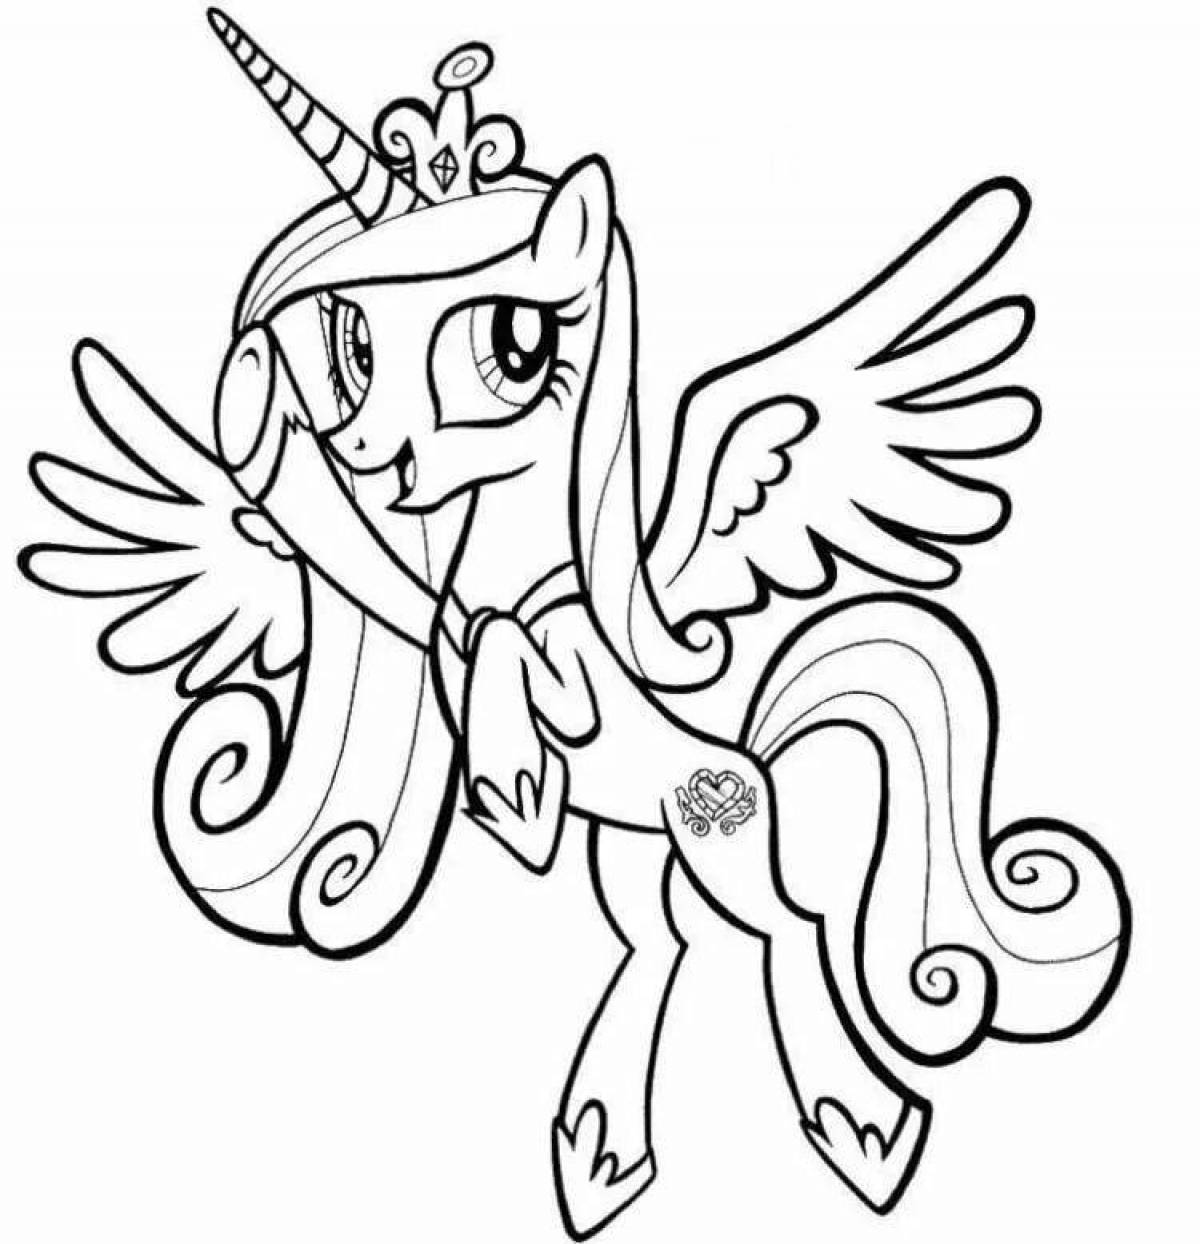 Coloring page adorable little pony